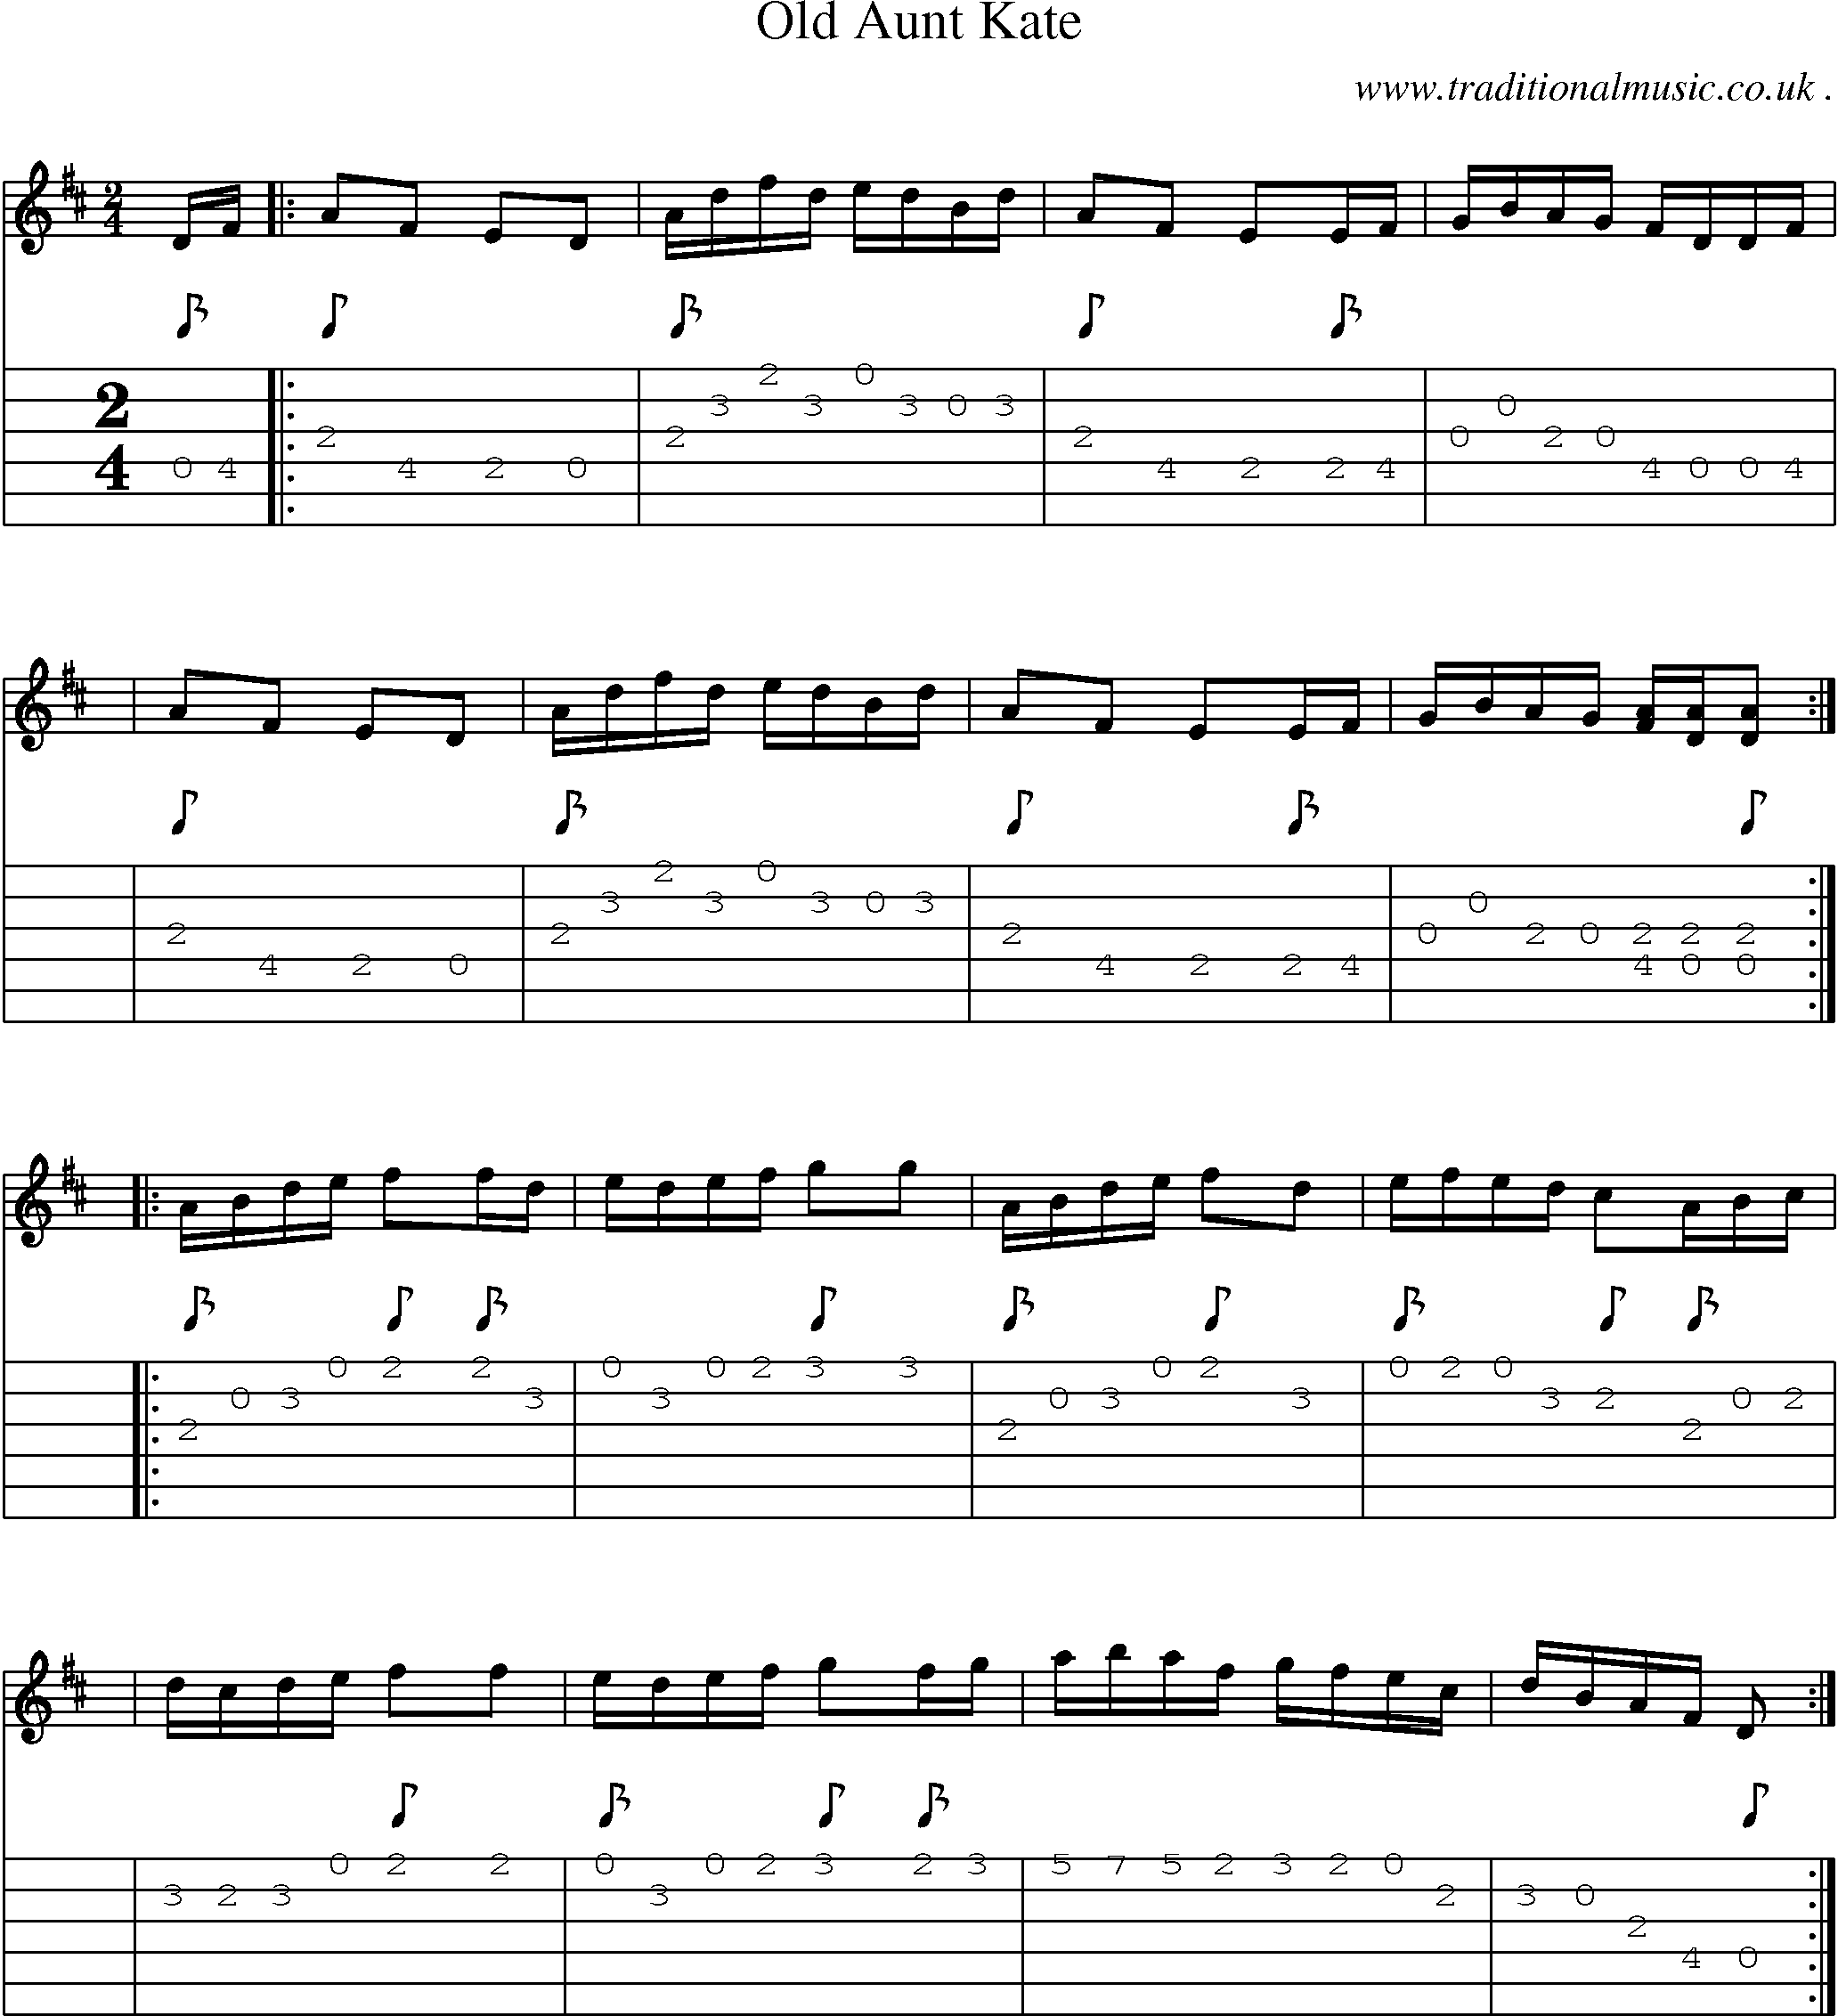 Music Score and Guitar Tabs for Old Aunt Kate